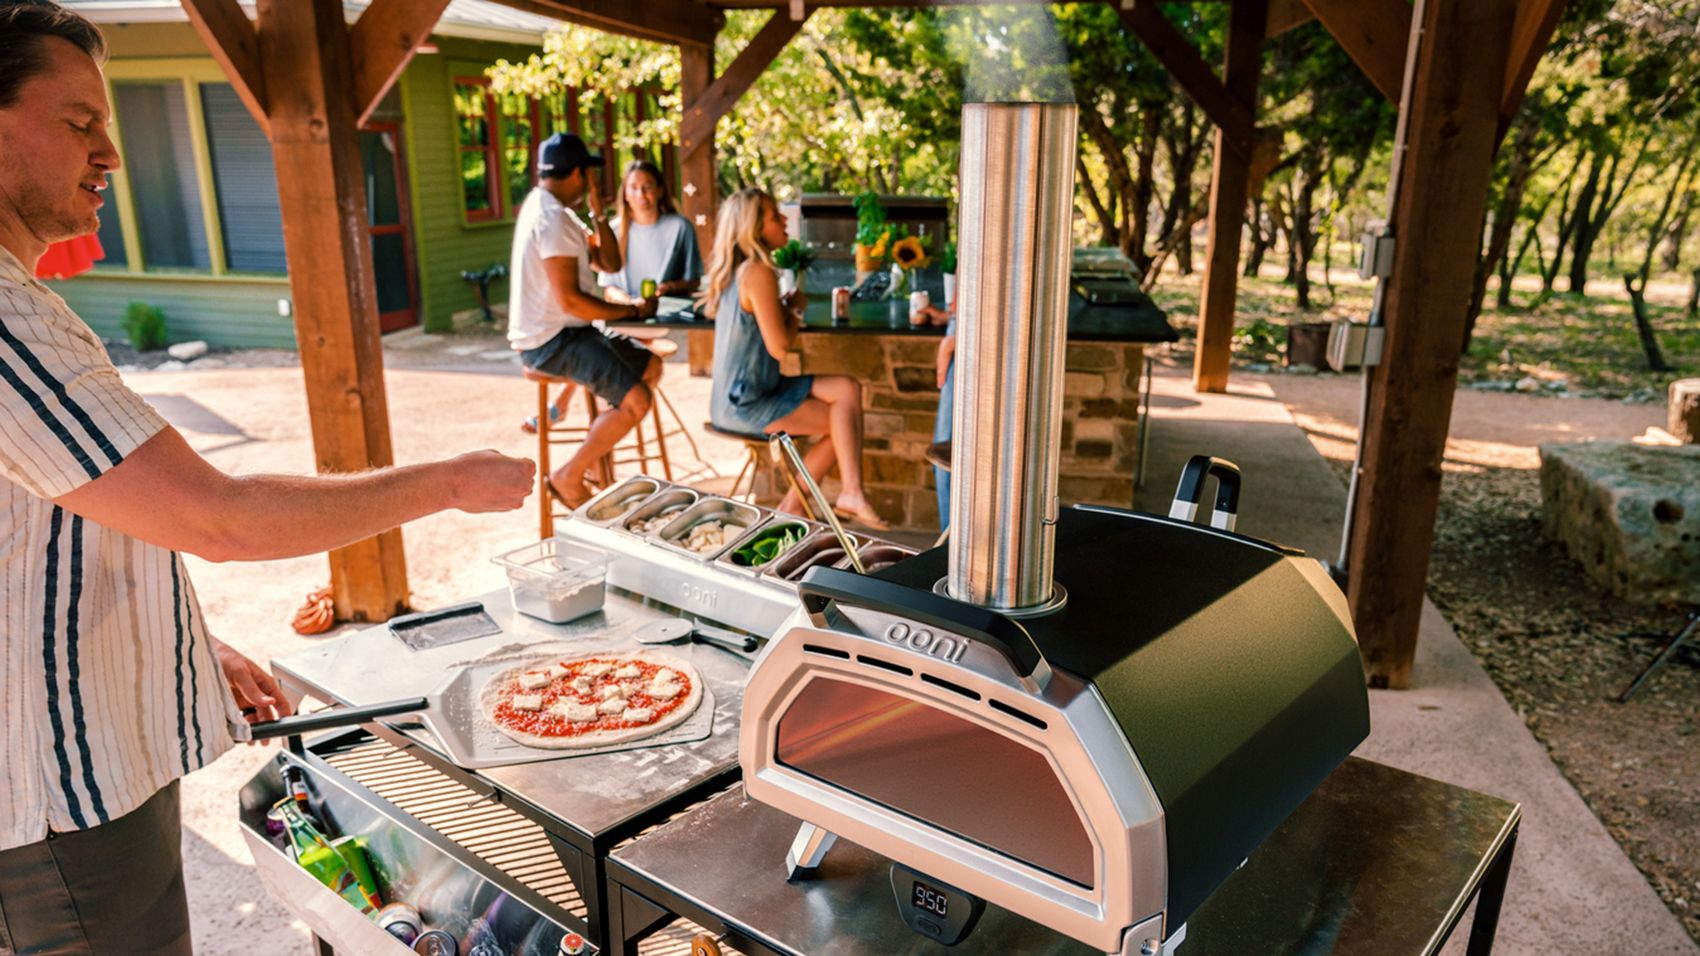 The Ooni Karu 12 Pizza Oven Is $100 Off for Labor Day